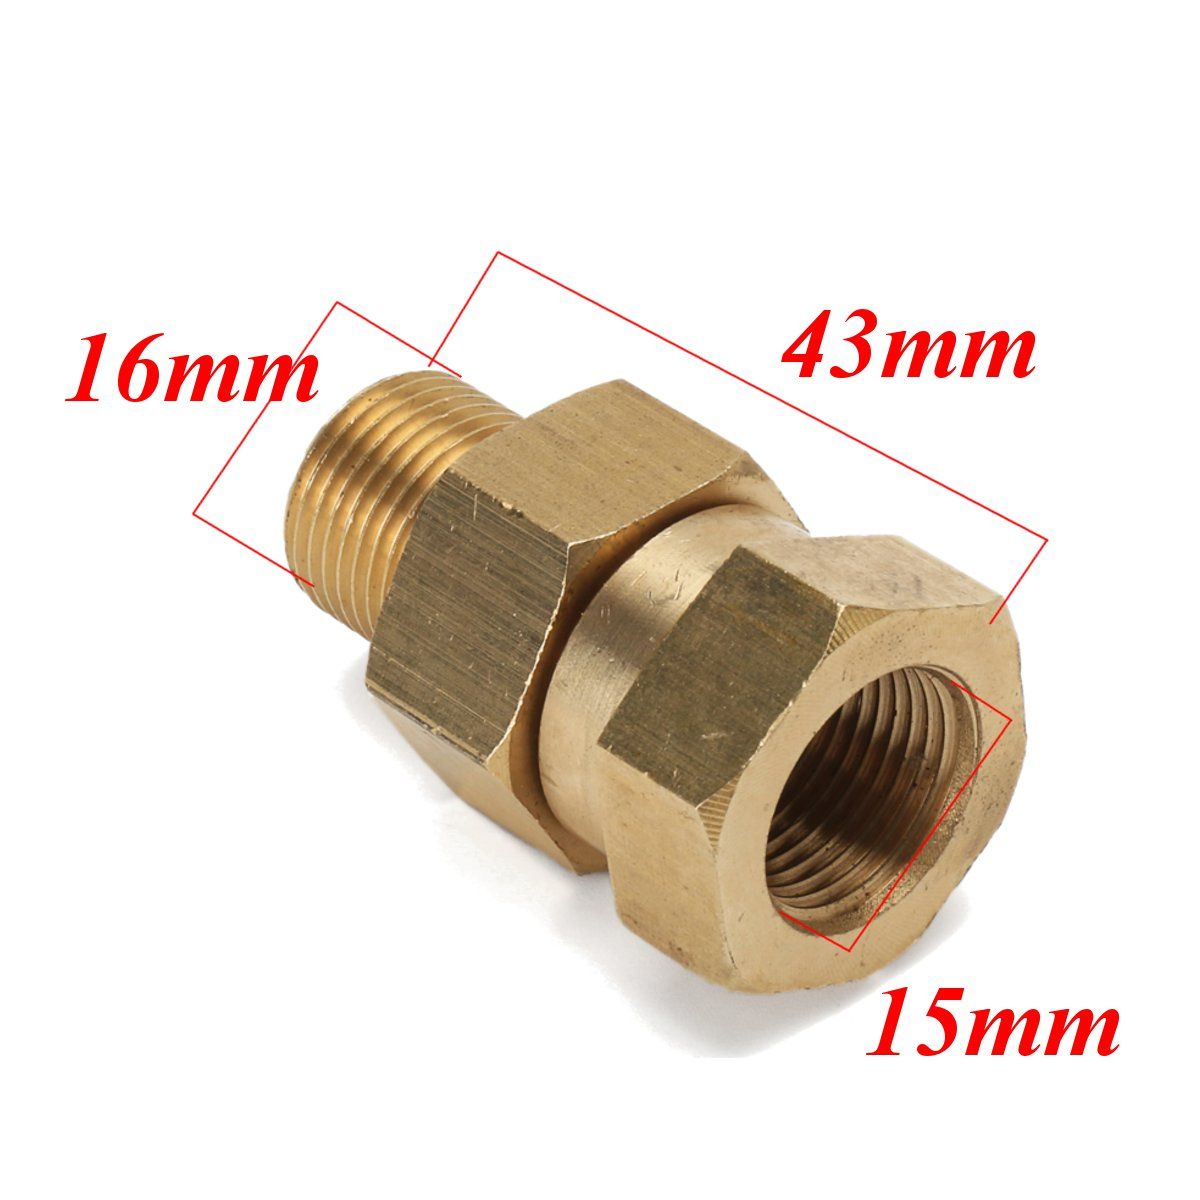 38-Inch-BSP-Brass-Pressure-Washer-Swivel-Adapter-Male-to-Female-Hose-Coulper-Fitting-1153375